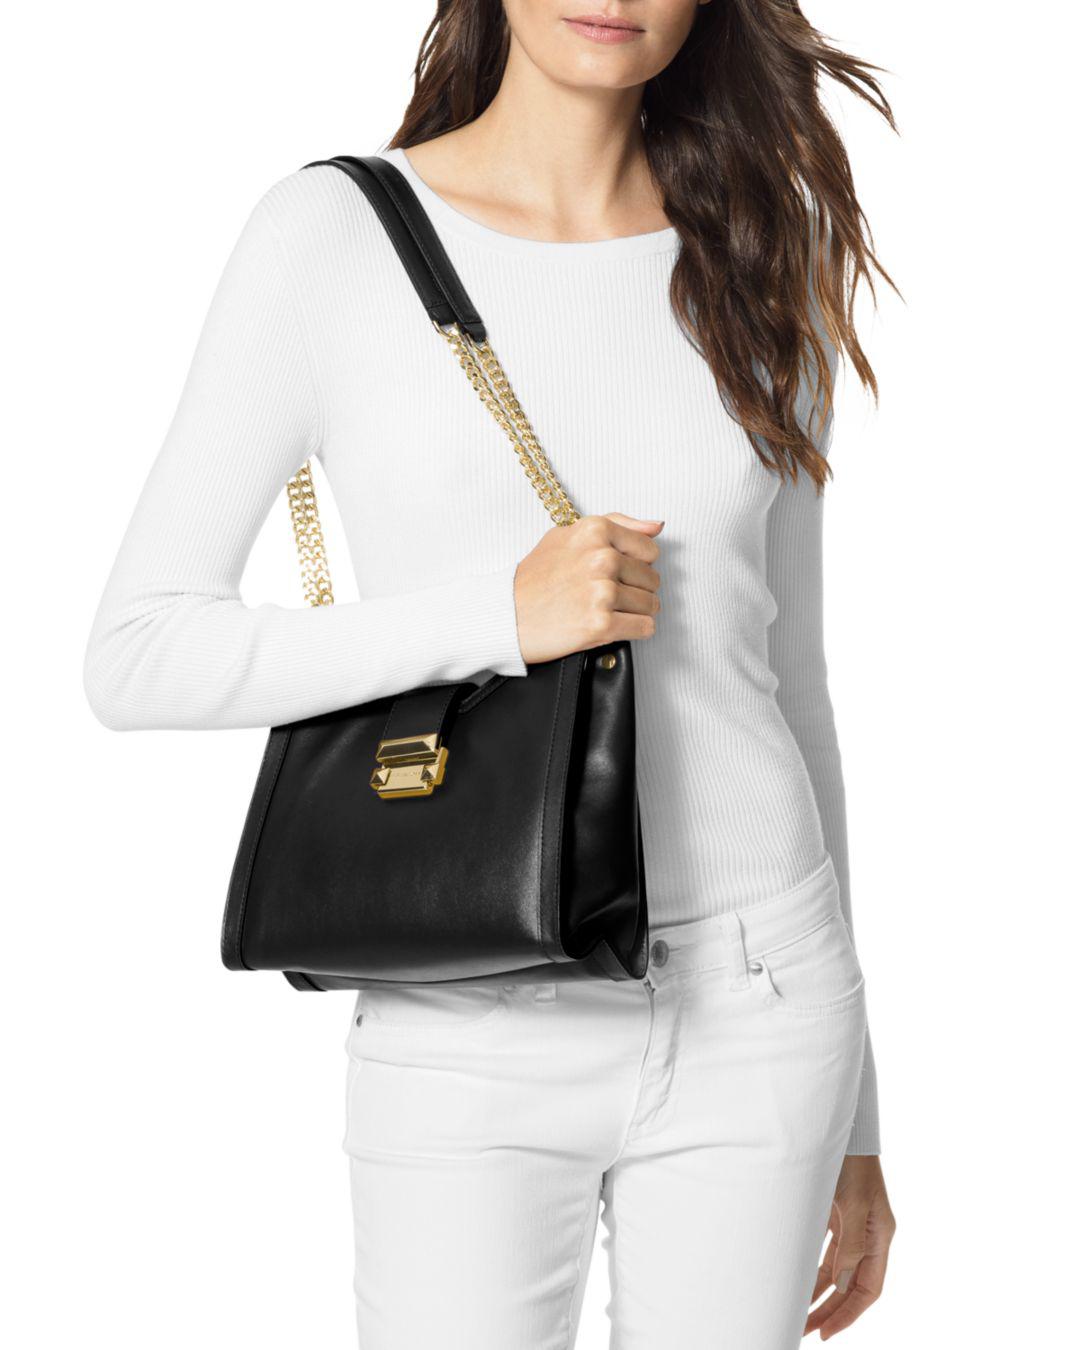 whitney small leather shoulder bag